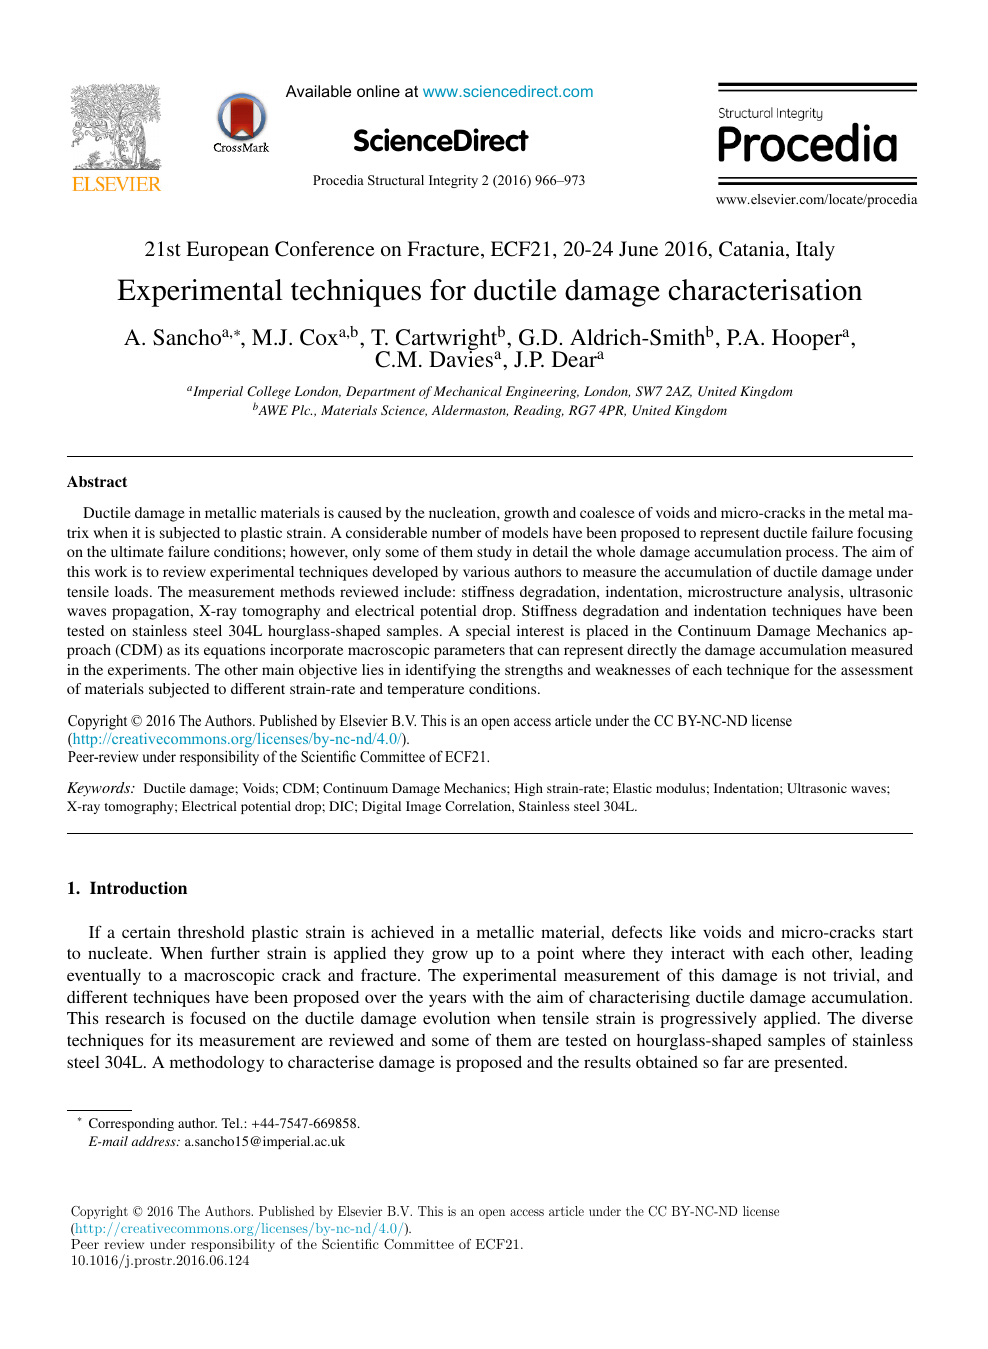 Experimental Techniques For Ductile Damage Characterisation Topic Of Research Paper In Materials Engineering Download Scholarly Article Pdf And Read For Free On Cyberleninka Open Science Hub